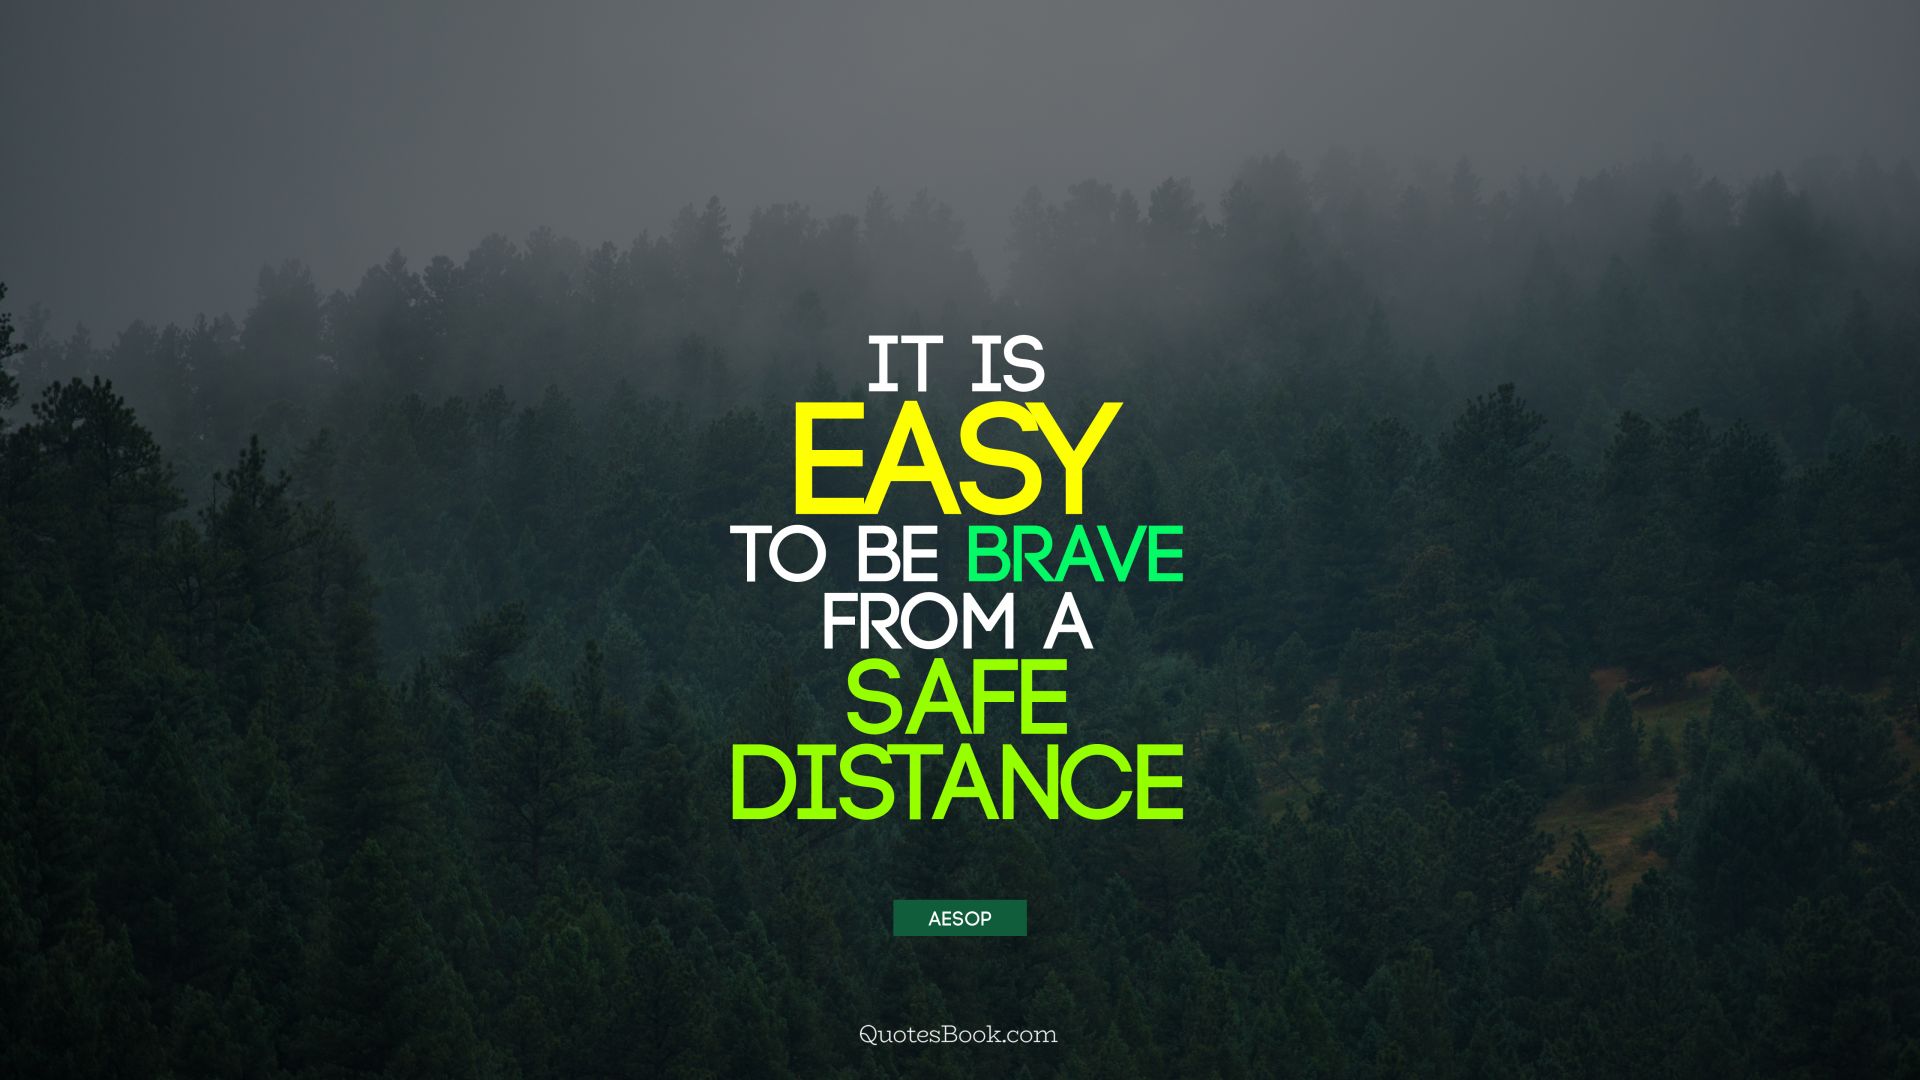 It is easy to be brave from a safe distance. - Quote by Aesop